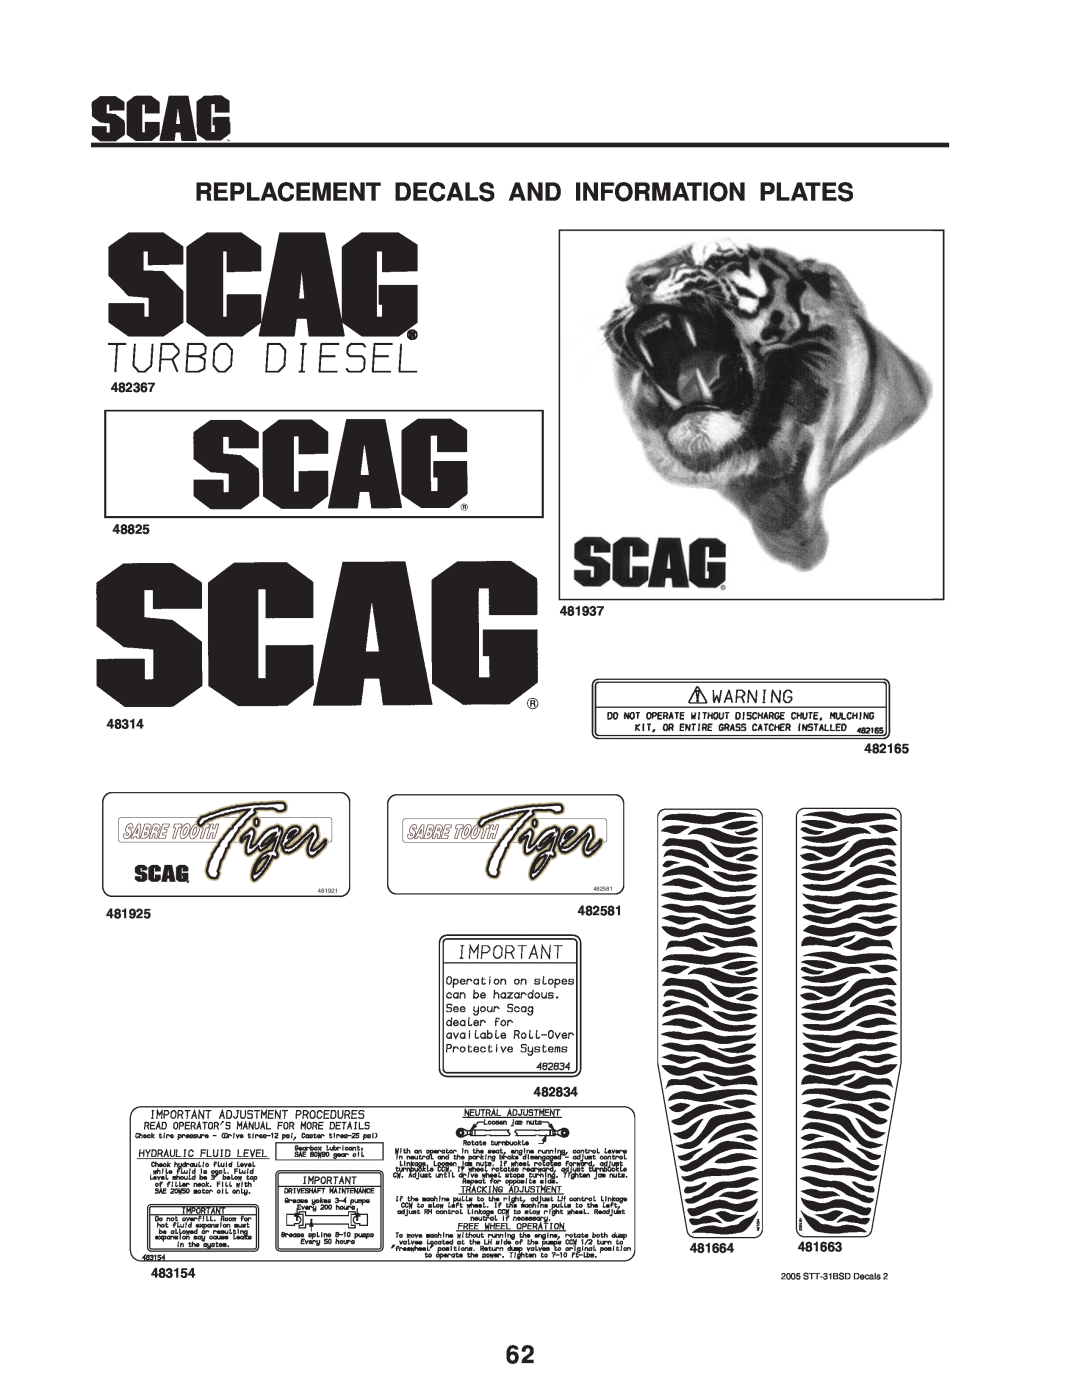 Scag Power Equipment STT-31BSD manual Replacement Decals And Information Plates, 482367 48825 481937 48314, 482581, 482834 